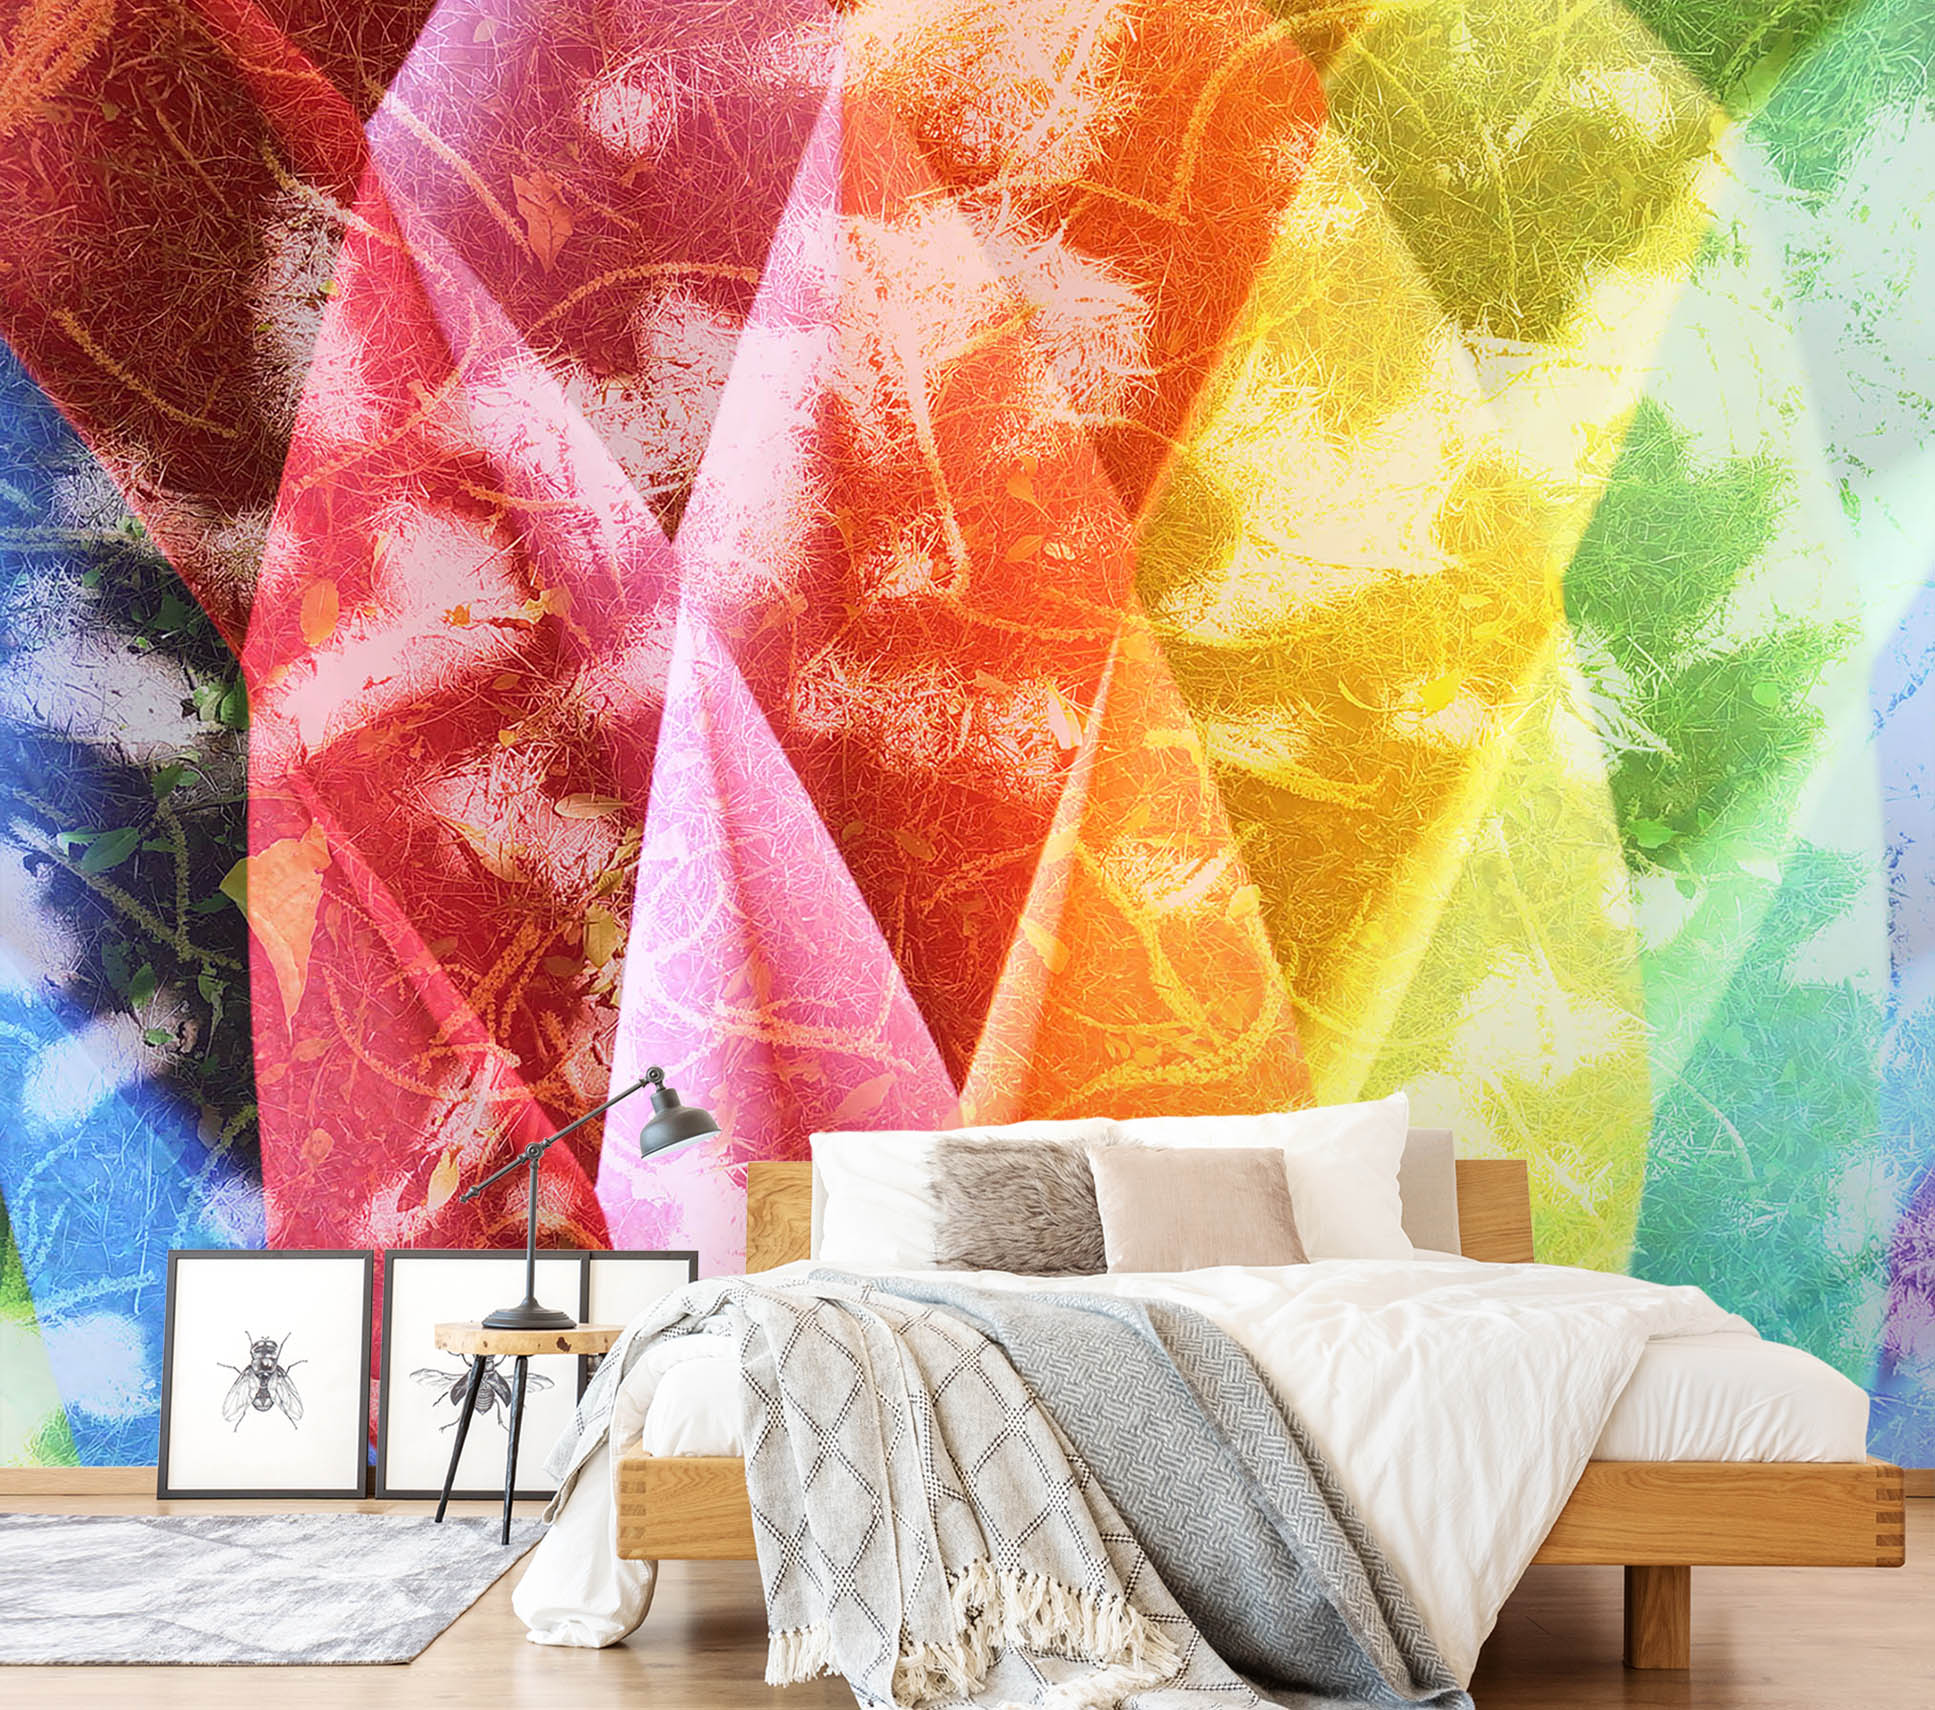 3D Color Cone 70116 Shandra Smith Wall Mural Wall Murals